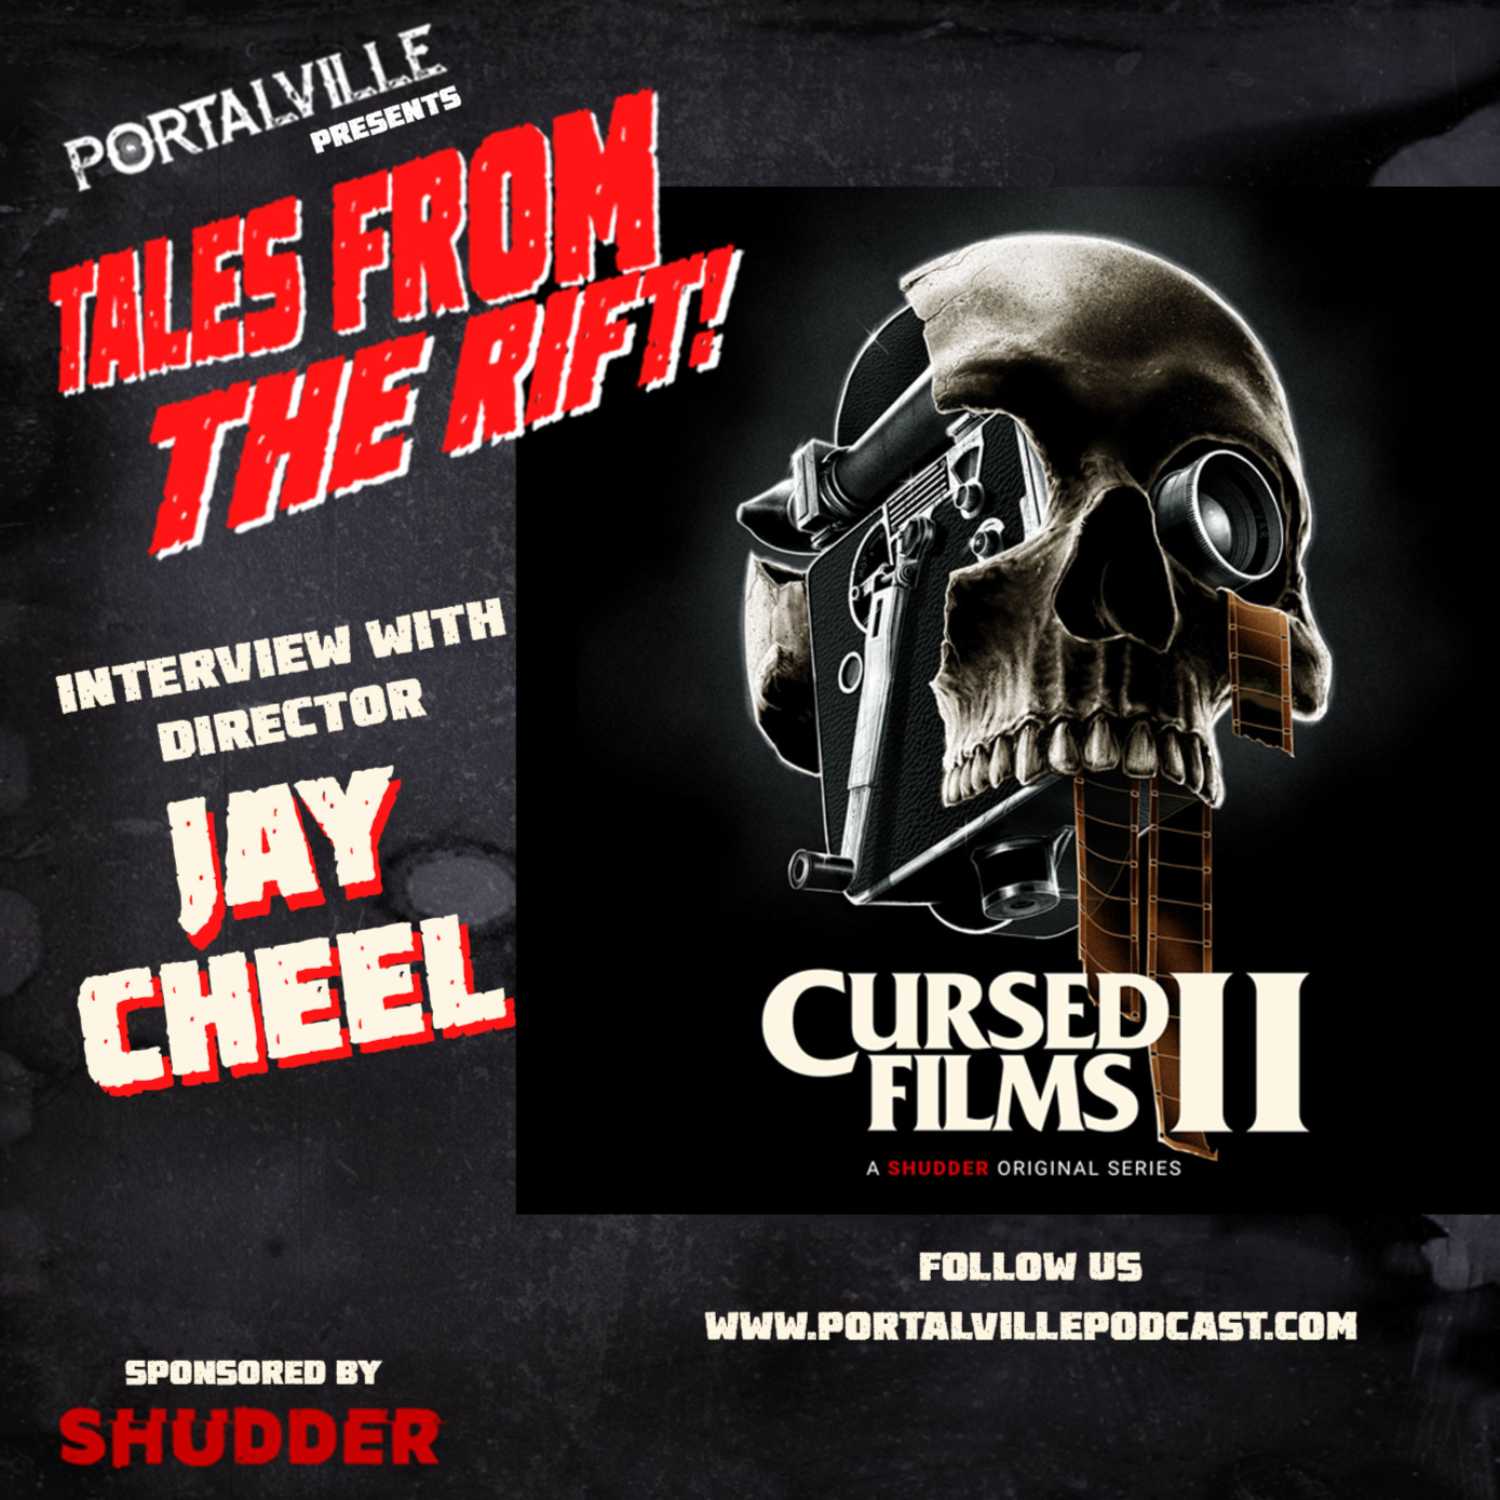 Interview with director Jay Cheel!